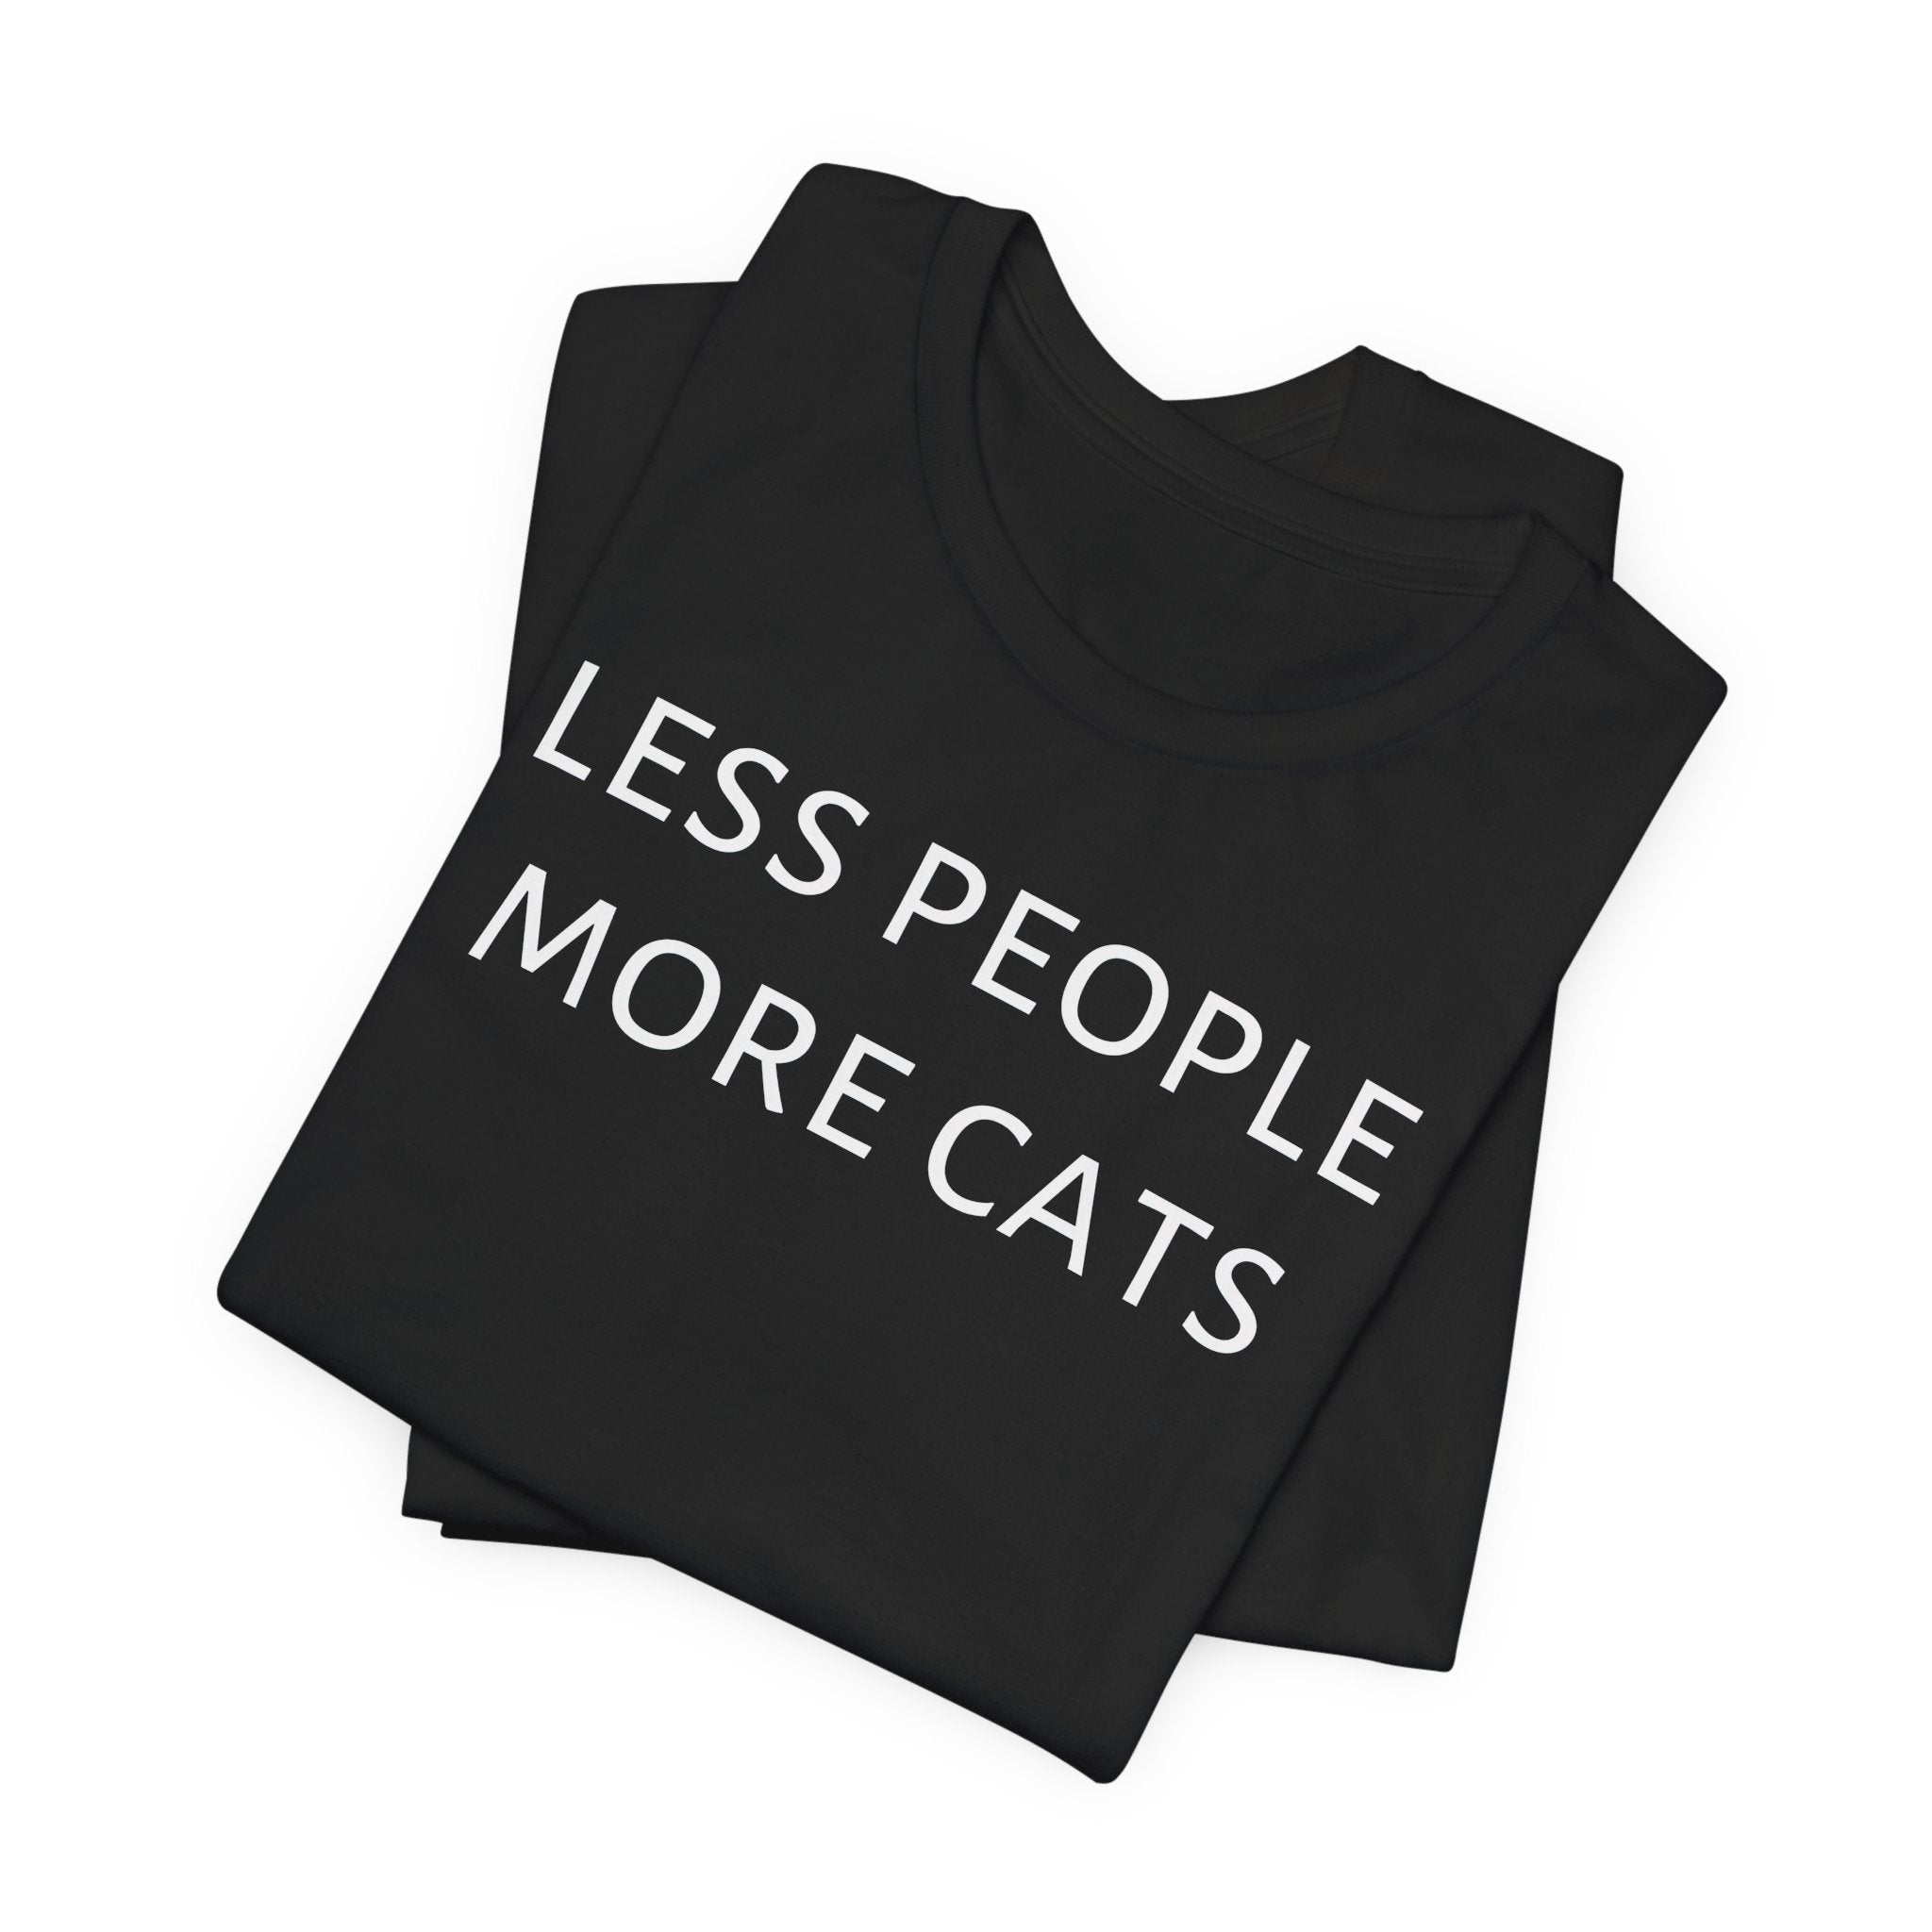 Less People More Cats T-Shirt